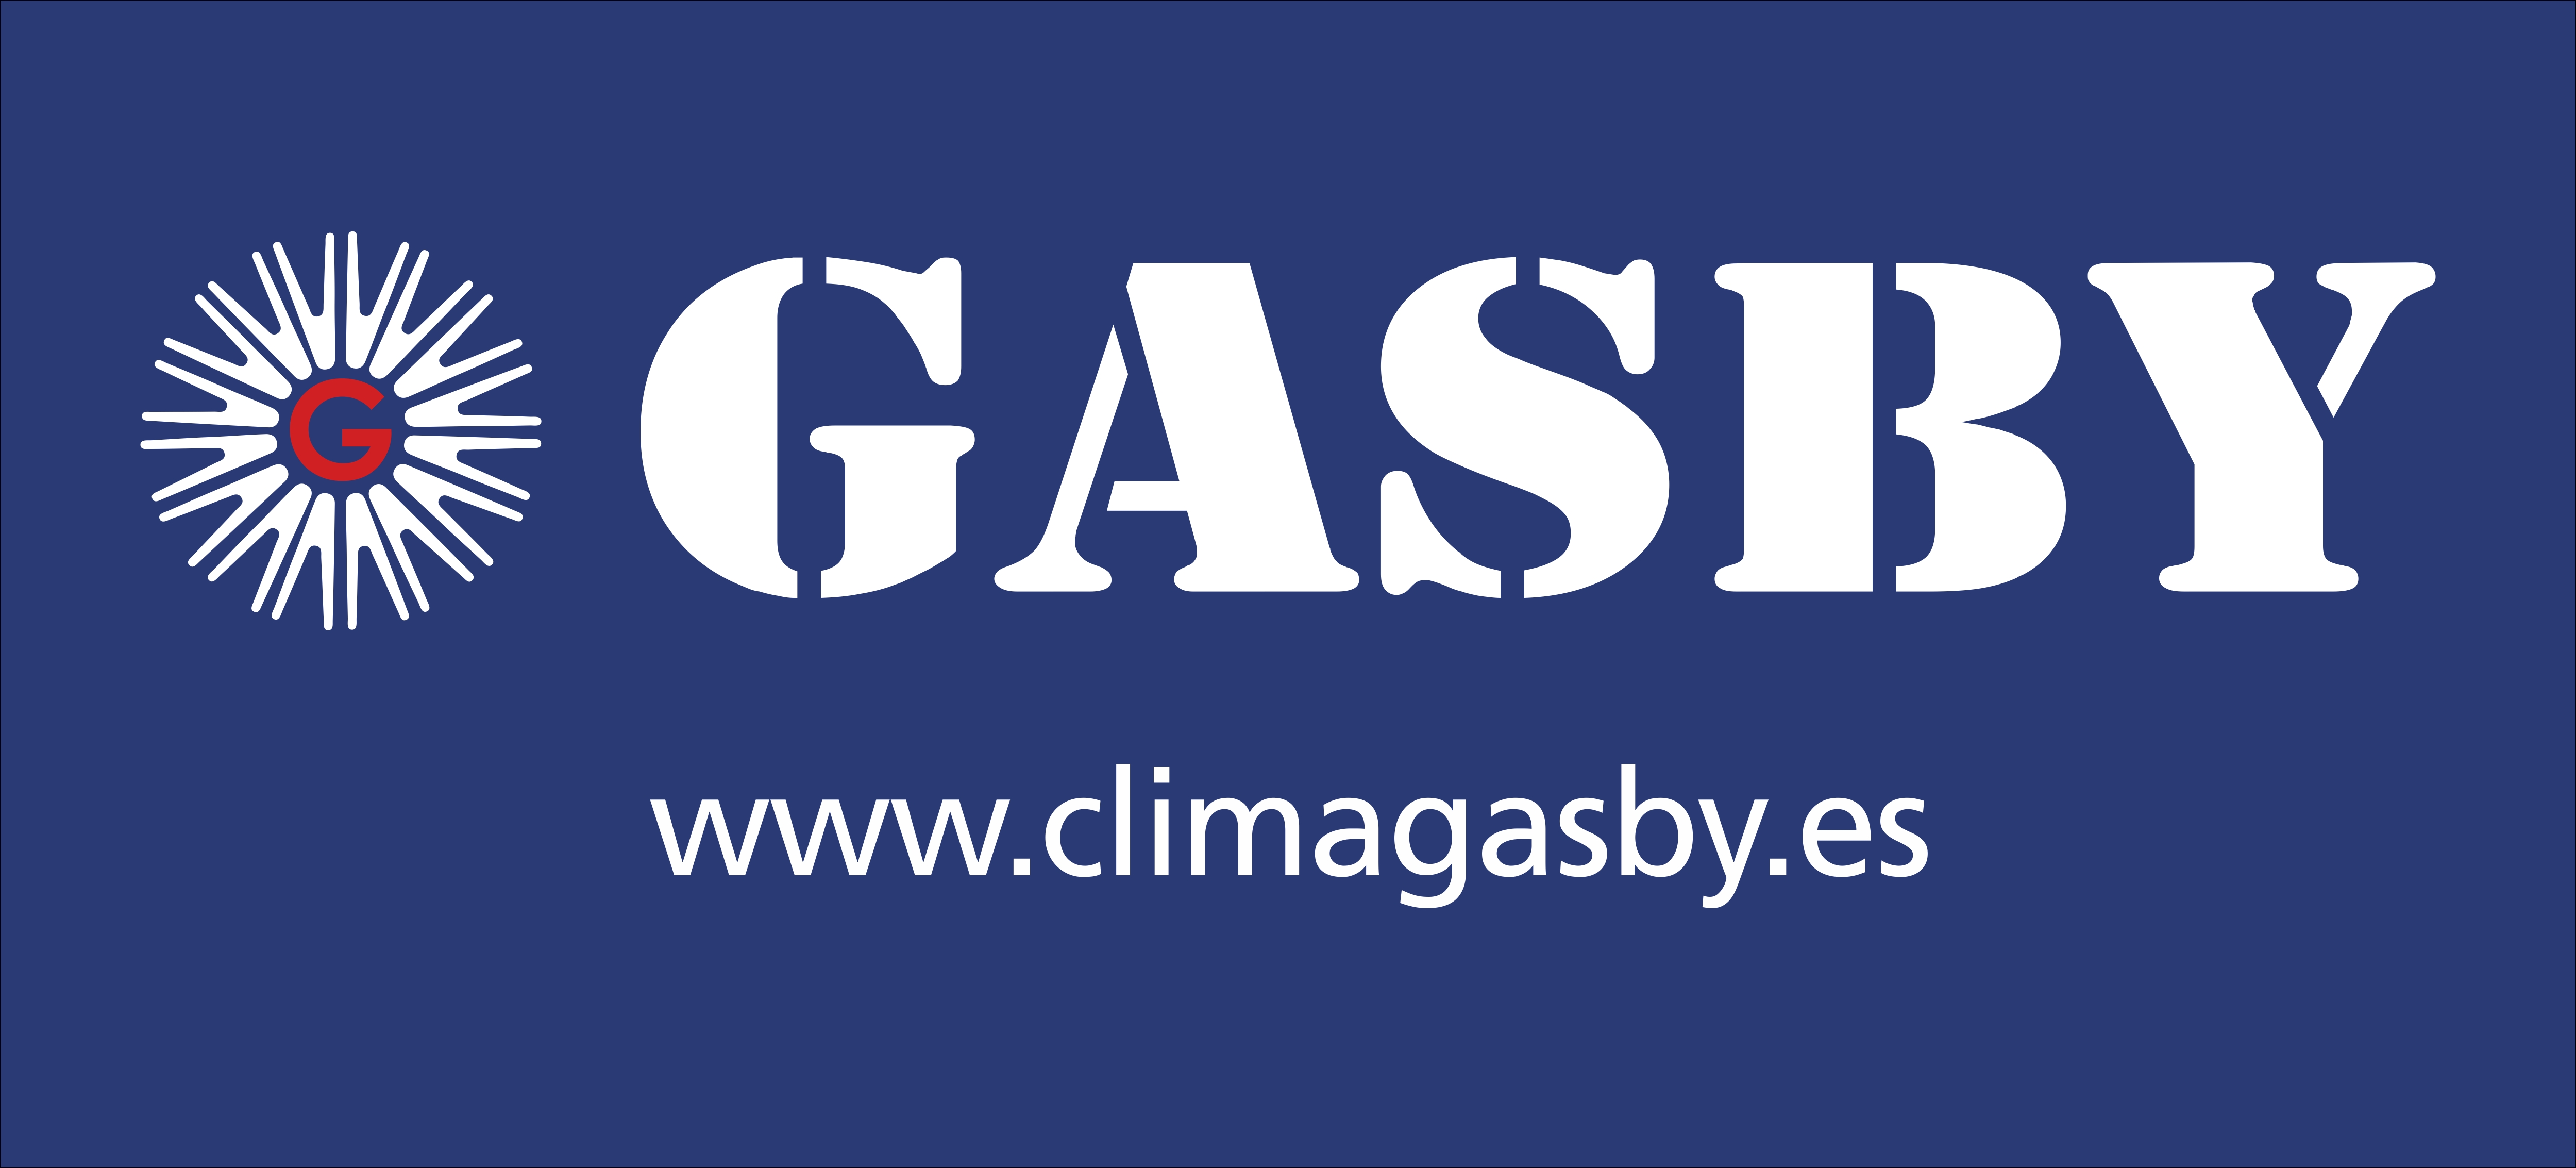 CLIMAGASBY